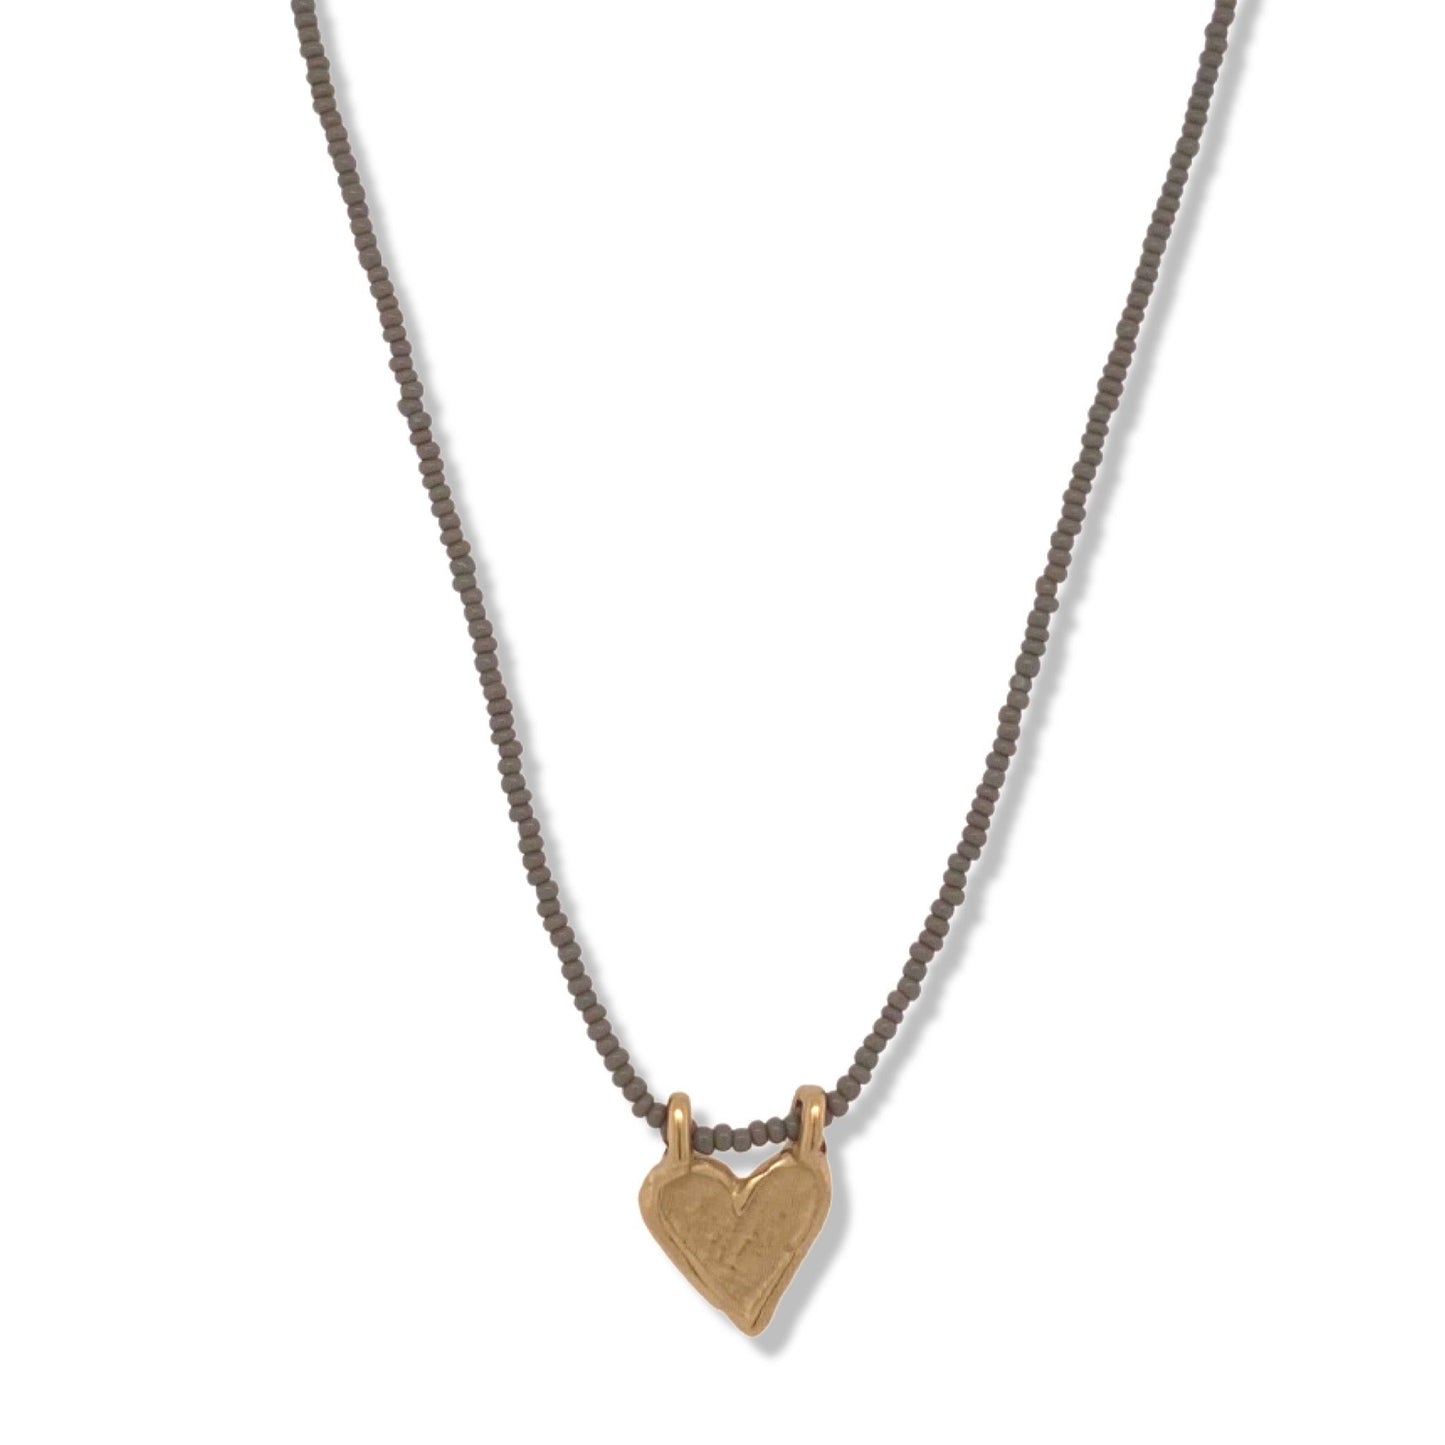 Mini Heart Charm Necklace in Gold on Micro Charcoal Beads | Nalu | Nantucket